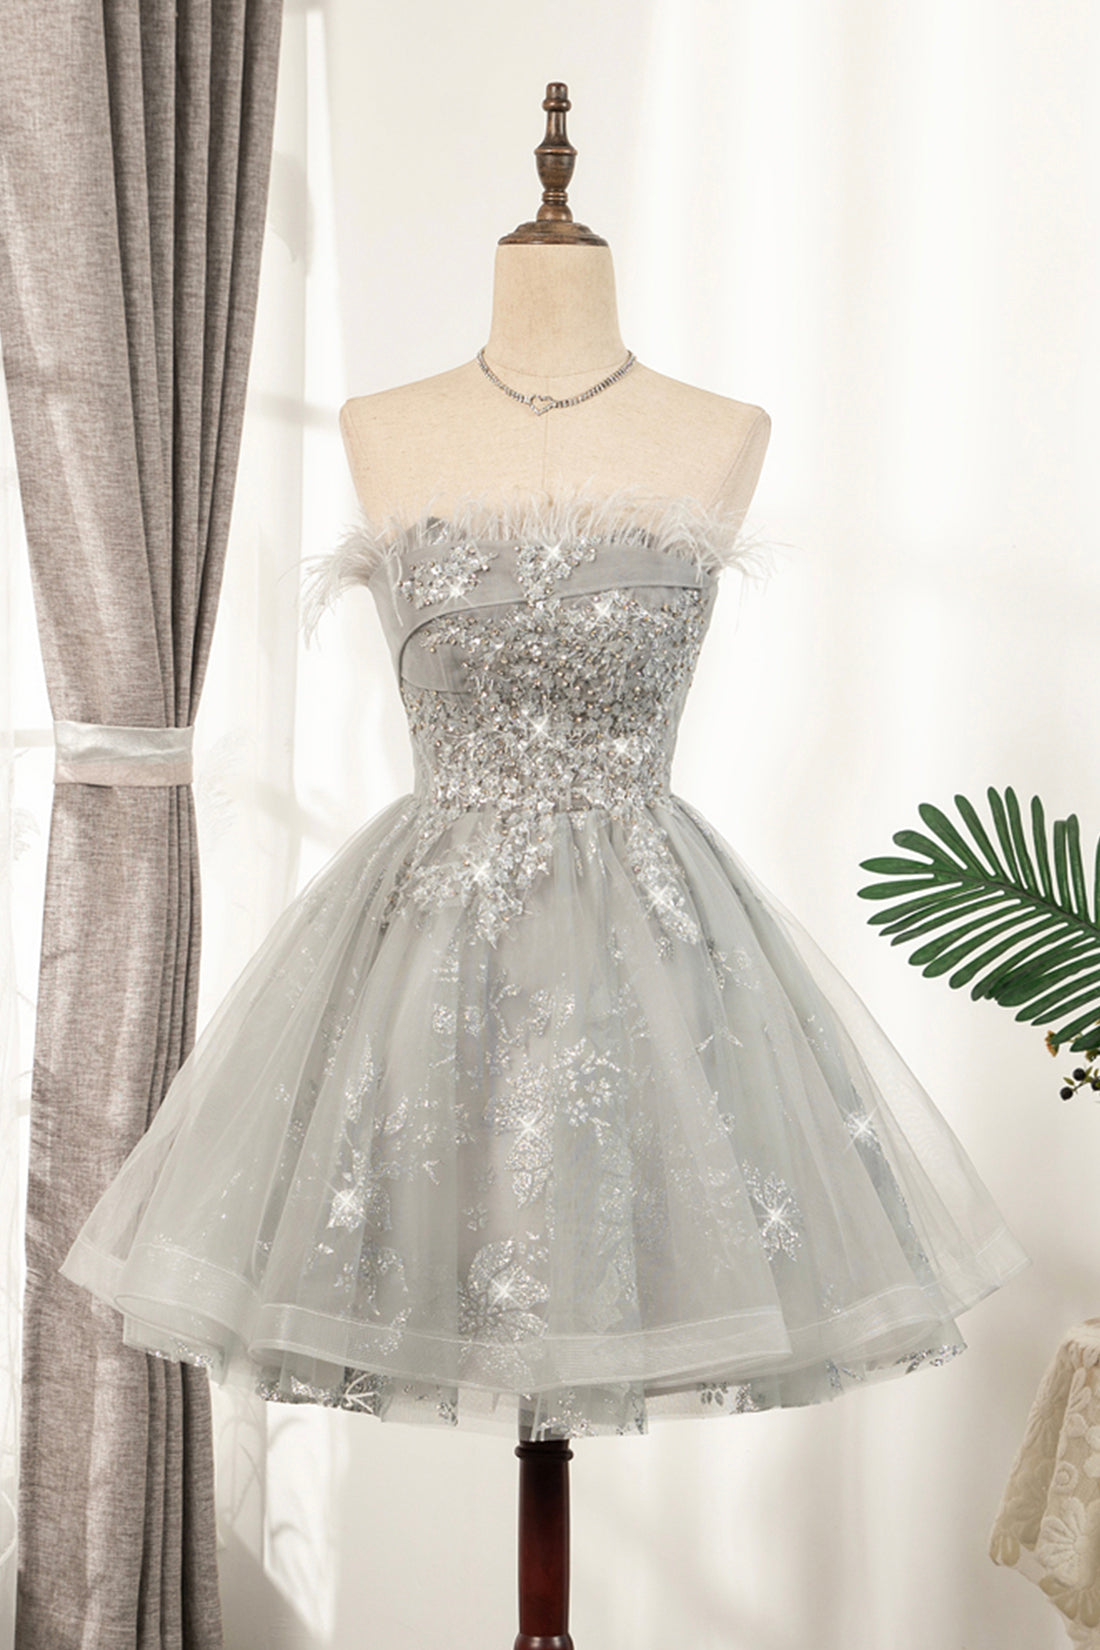 Gray Strapless Tulle Short Prom Dress with Sequins, Cute A-Line Party Dress